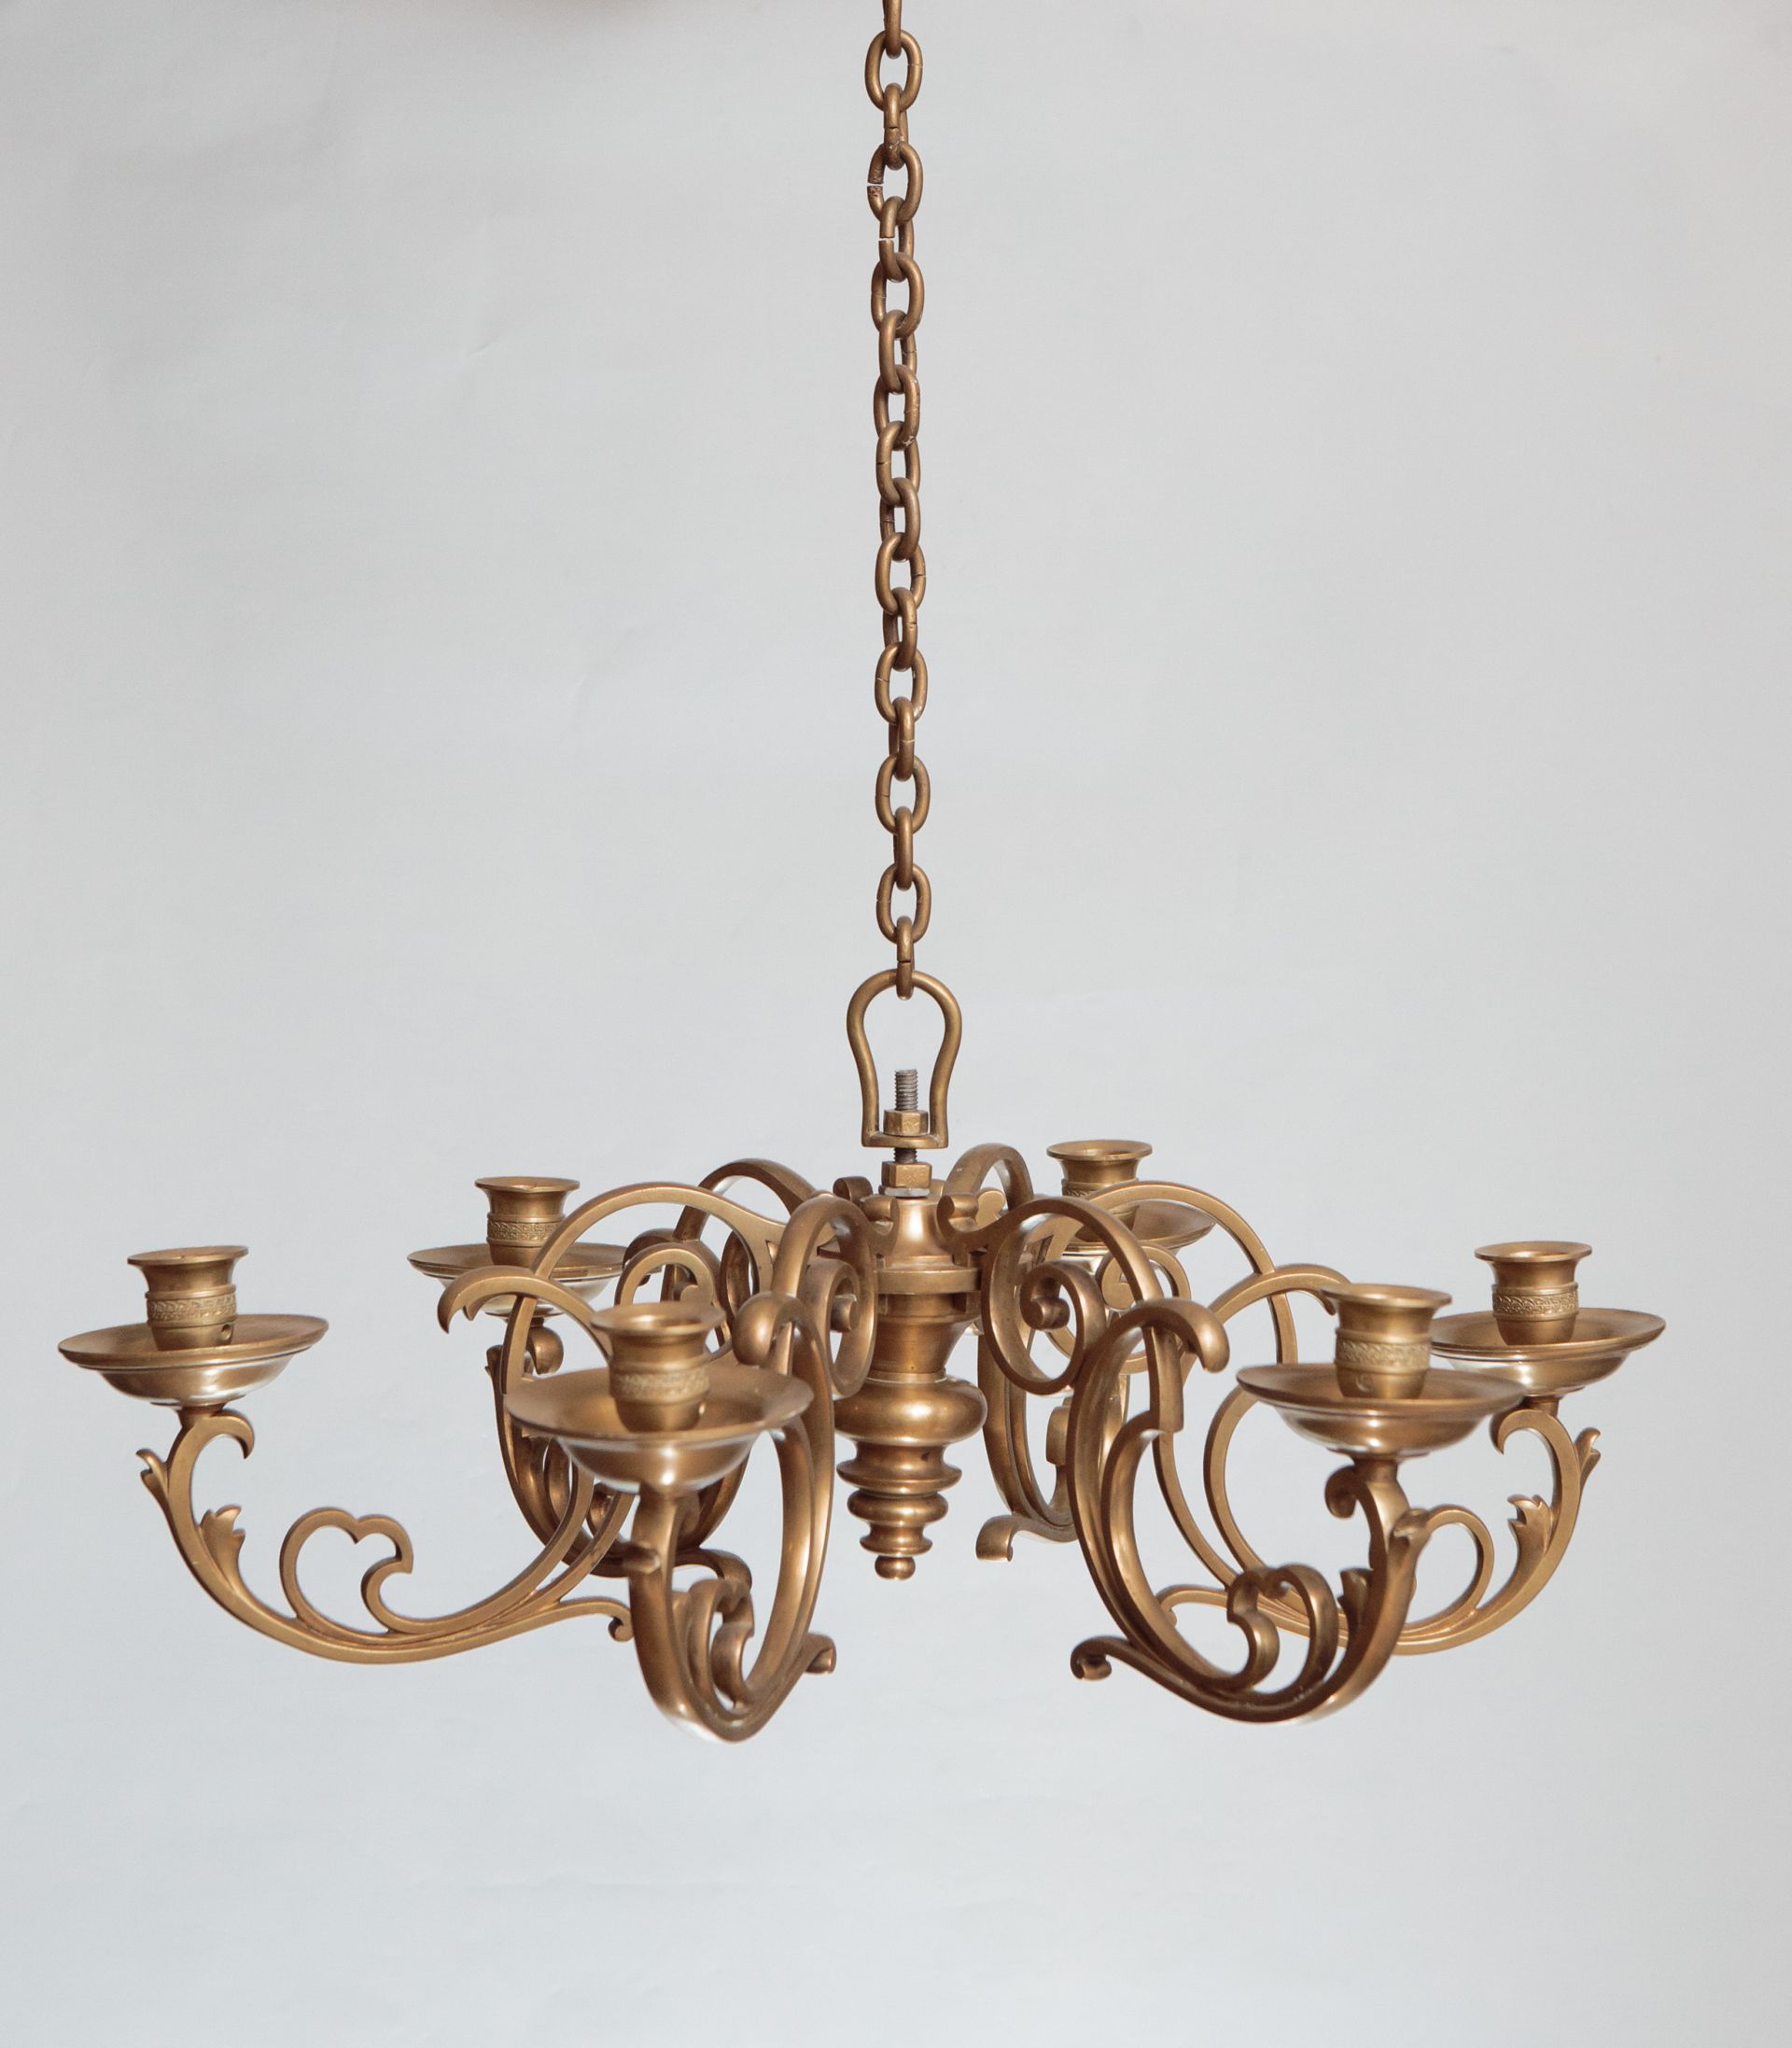 Chandelier, 1825–1875 (?), Lithuanian National Museum of Art, TM-2334. Photo by Tomas Kapočius, 2017